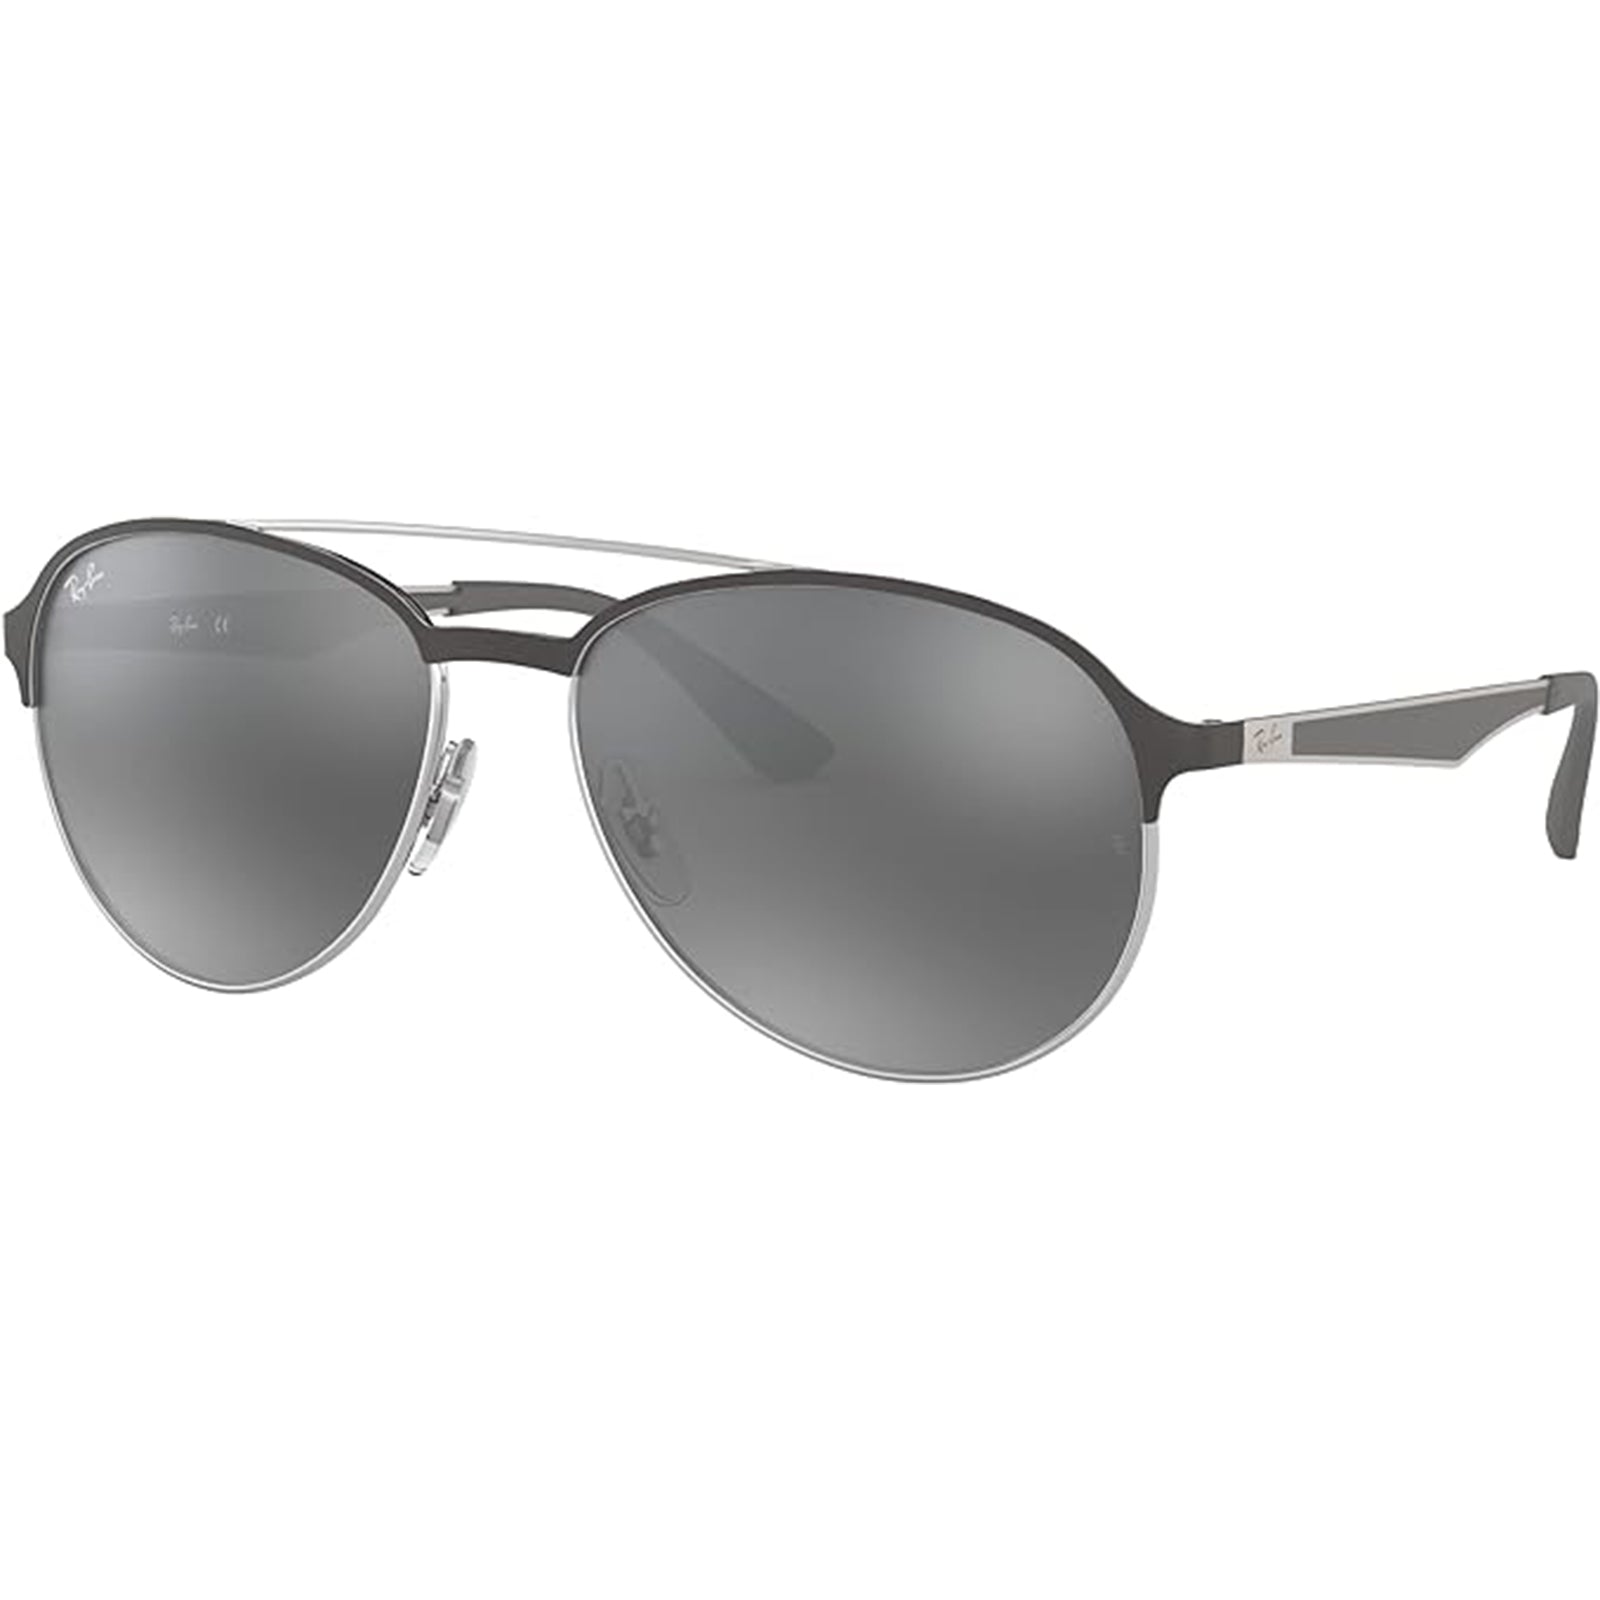 Ray-Ban Sunglasses -RB3025-181-62 - LifeStyle Collection